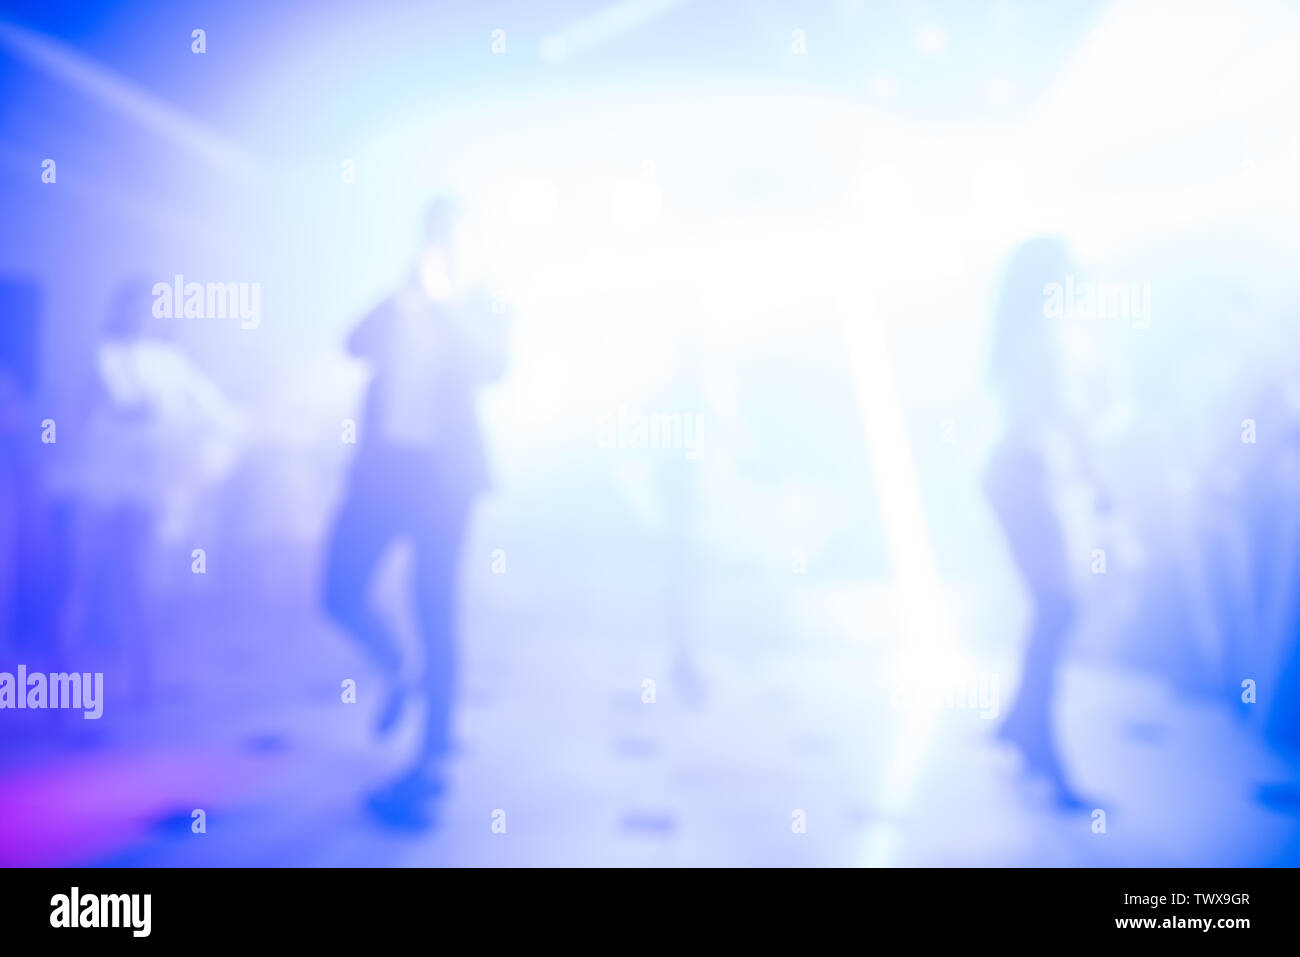 Abstract colorful background for design. Dance party in nightclub, light spotlights. Stock Photo